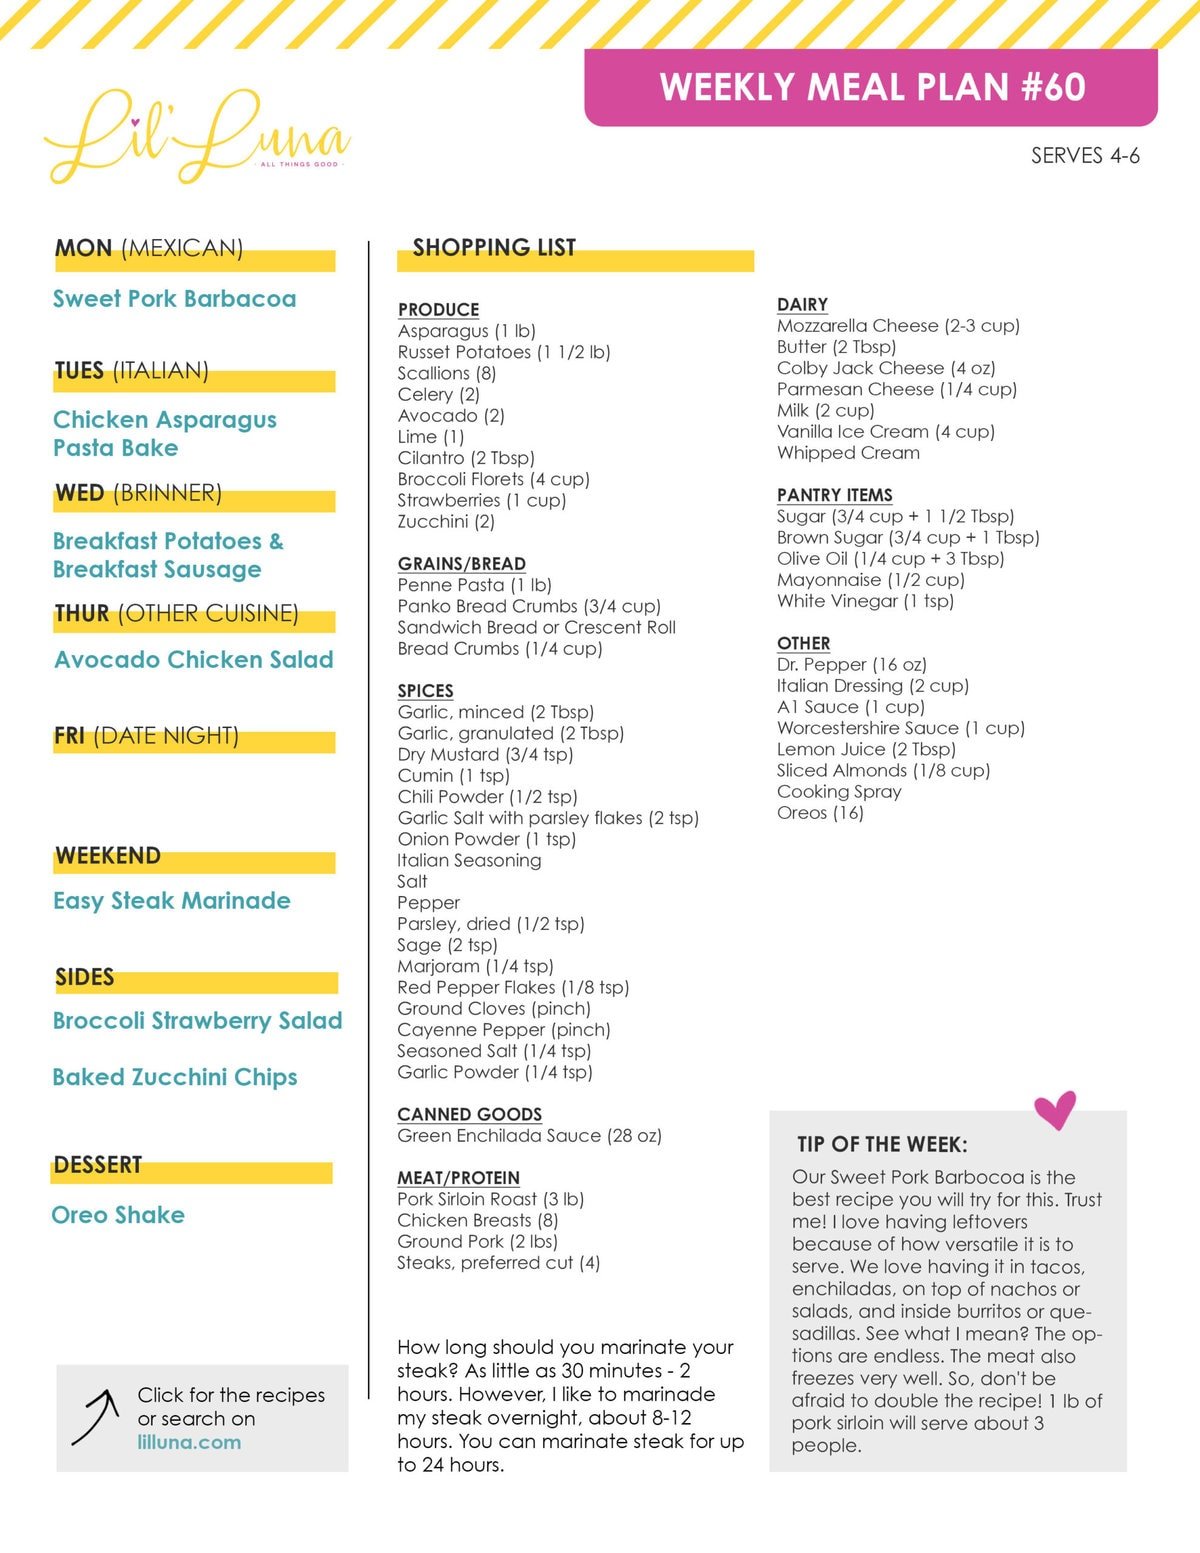 Printable version of Meal Plan #60 with grocery list.